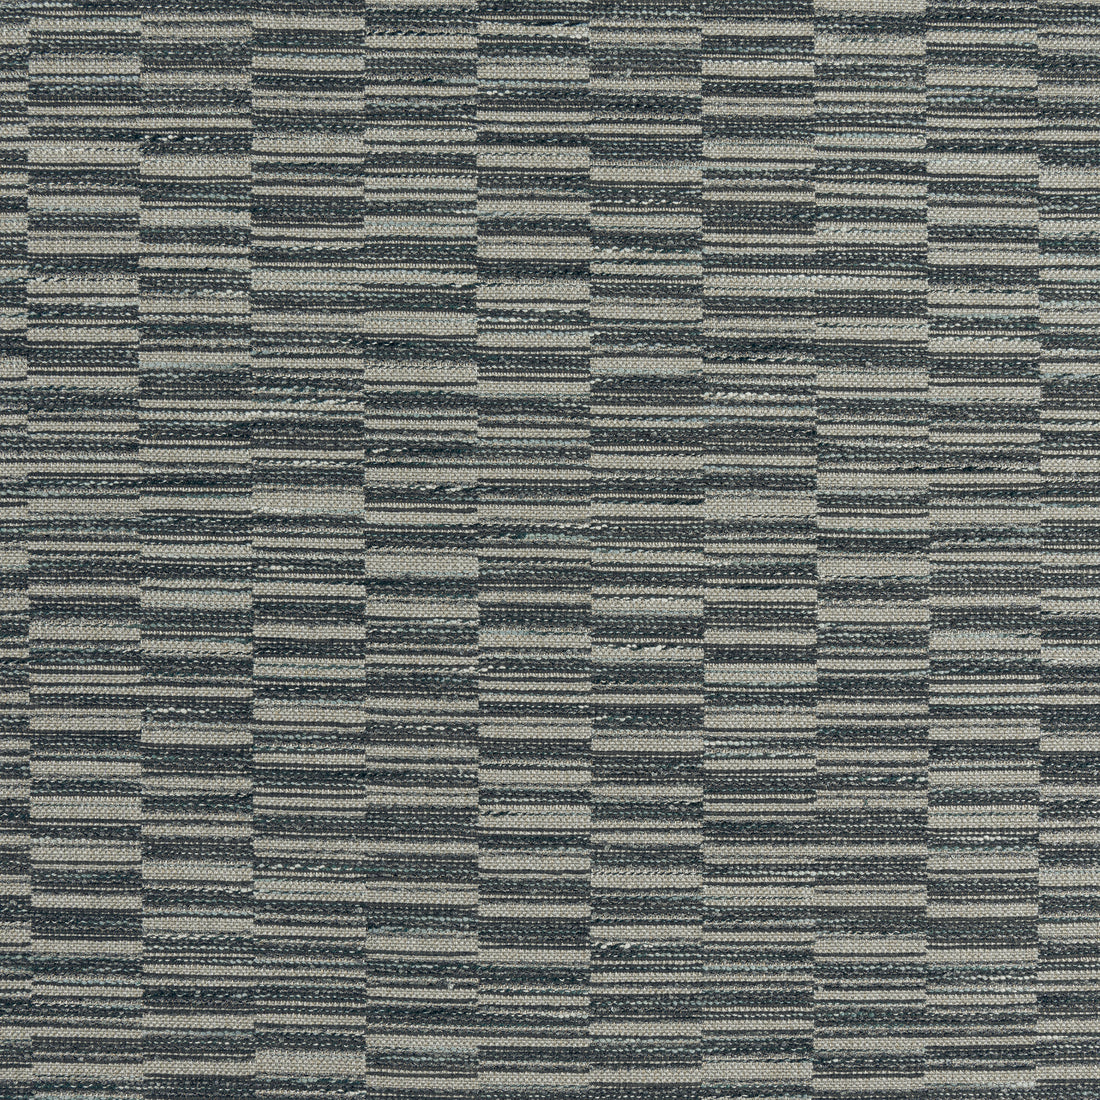 Legato fabric in smoke color - pattern number W8109 - by Thibaut in the Sereno collection